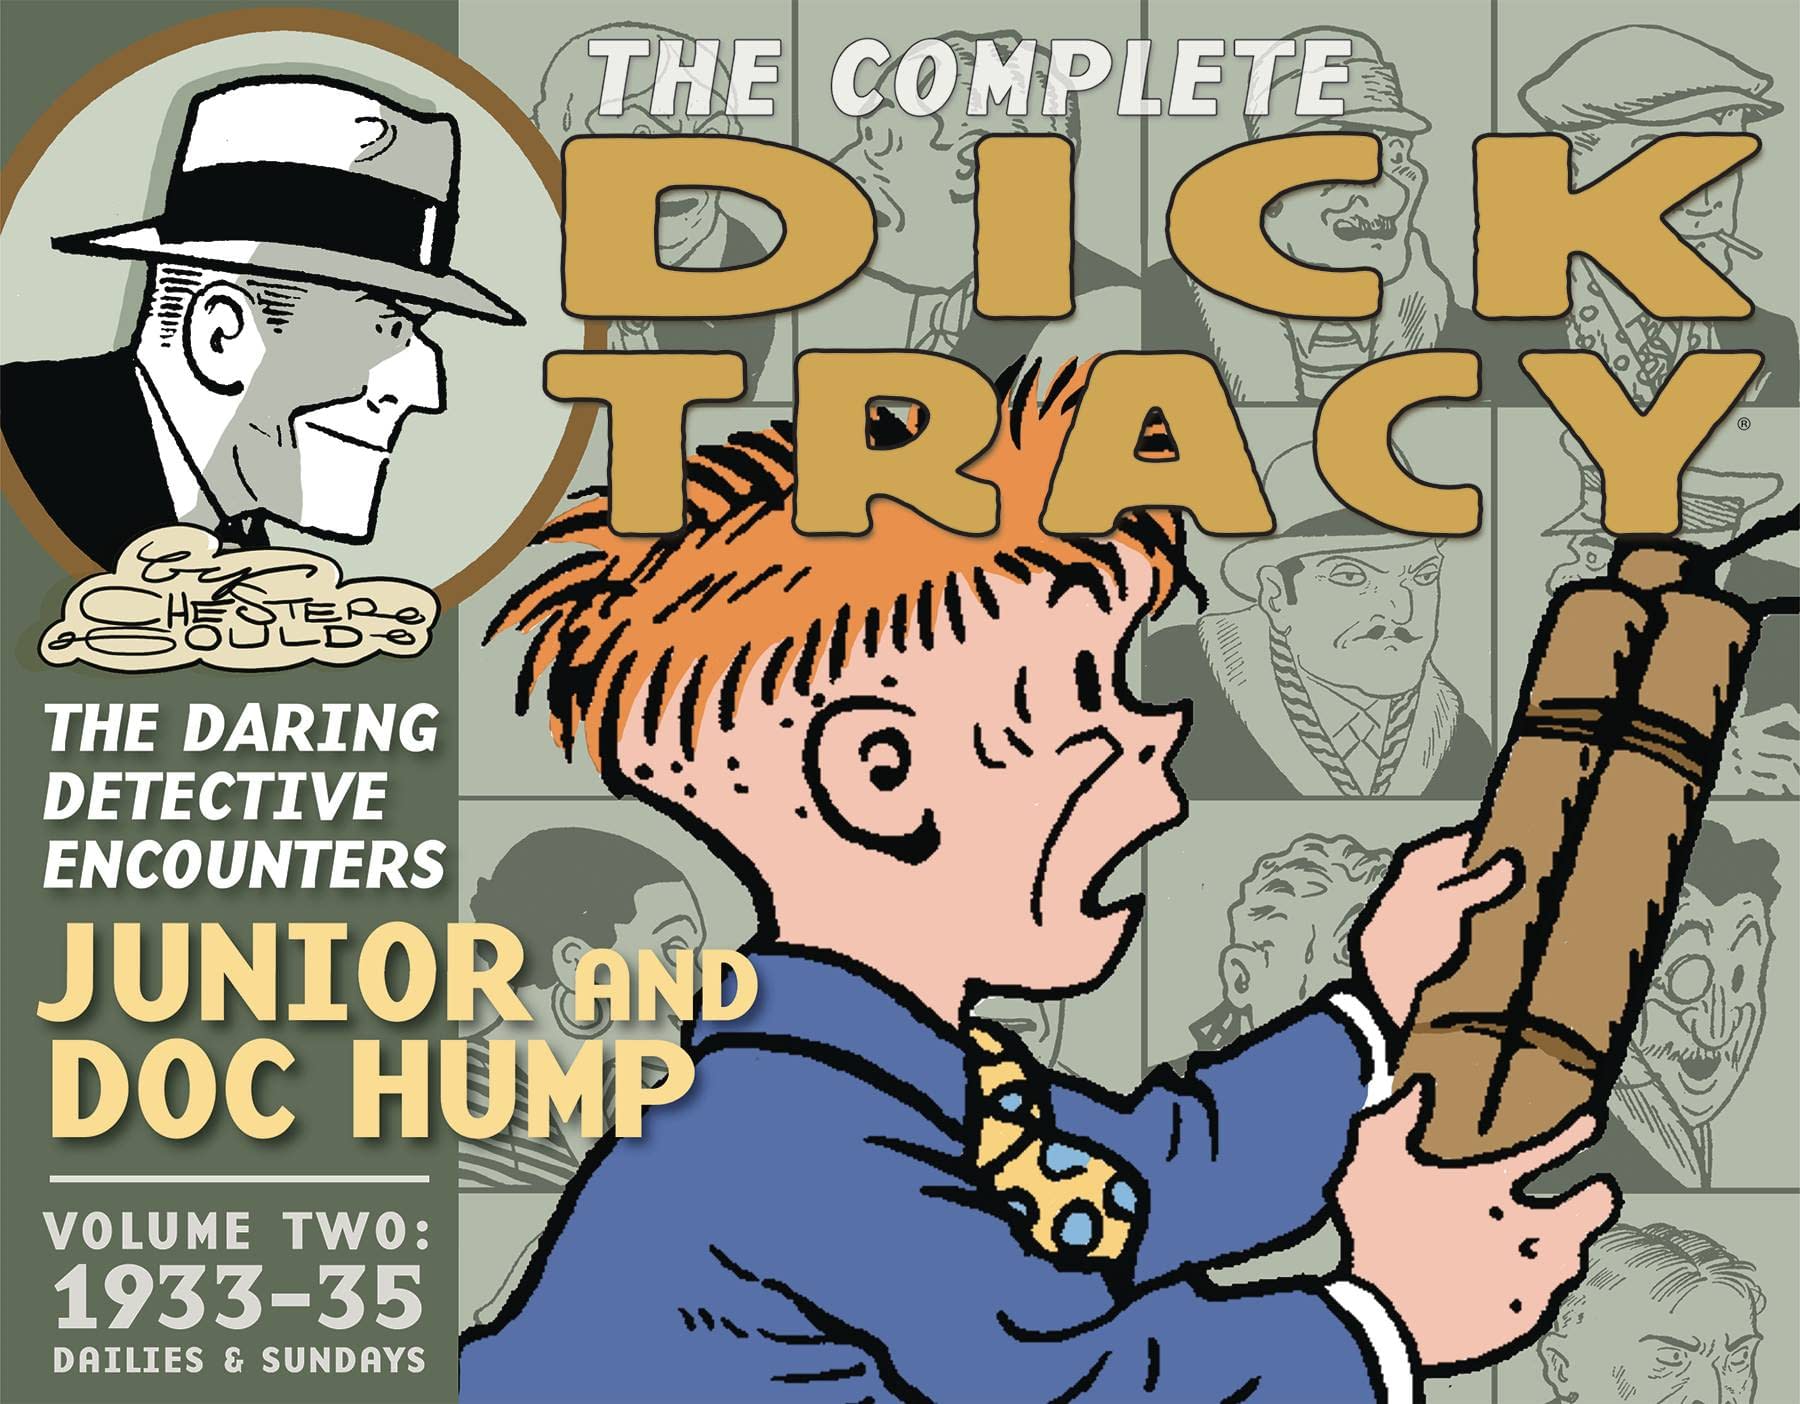 Clover Press To Republish Complete Dick Tracy